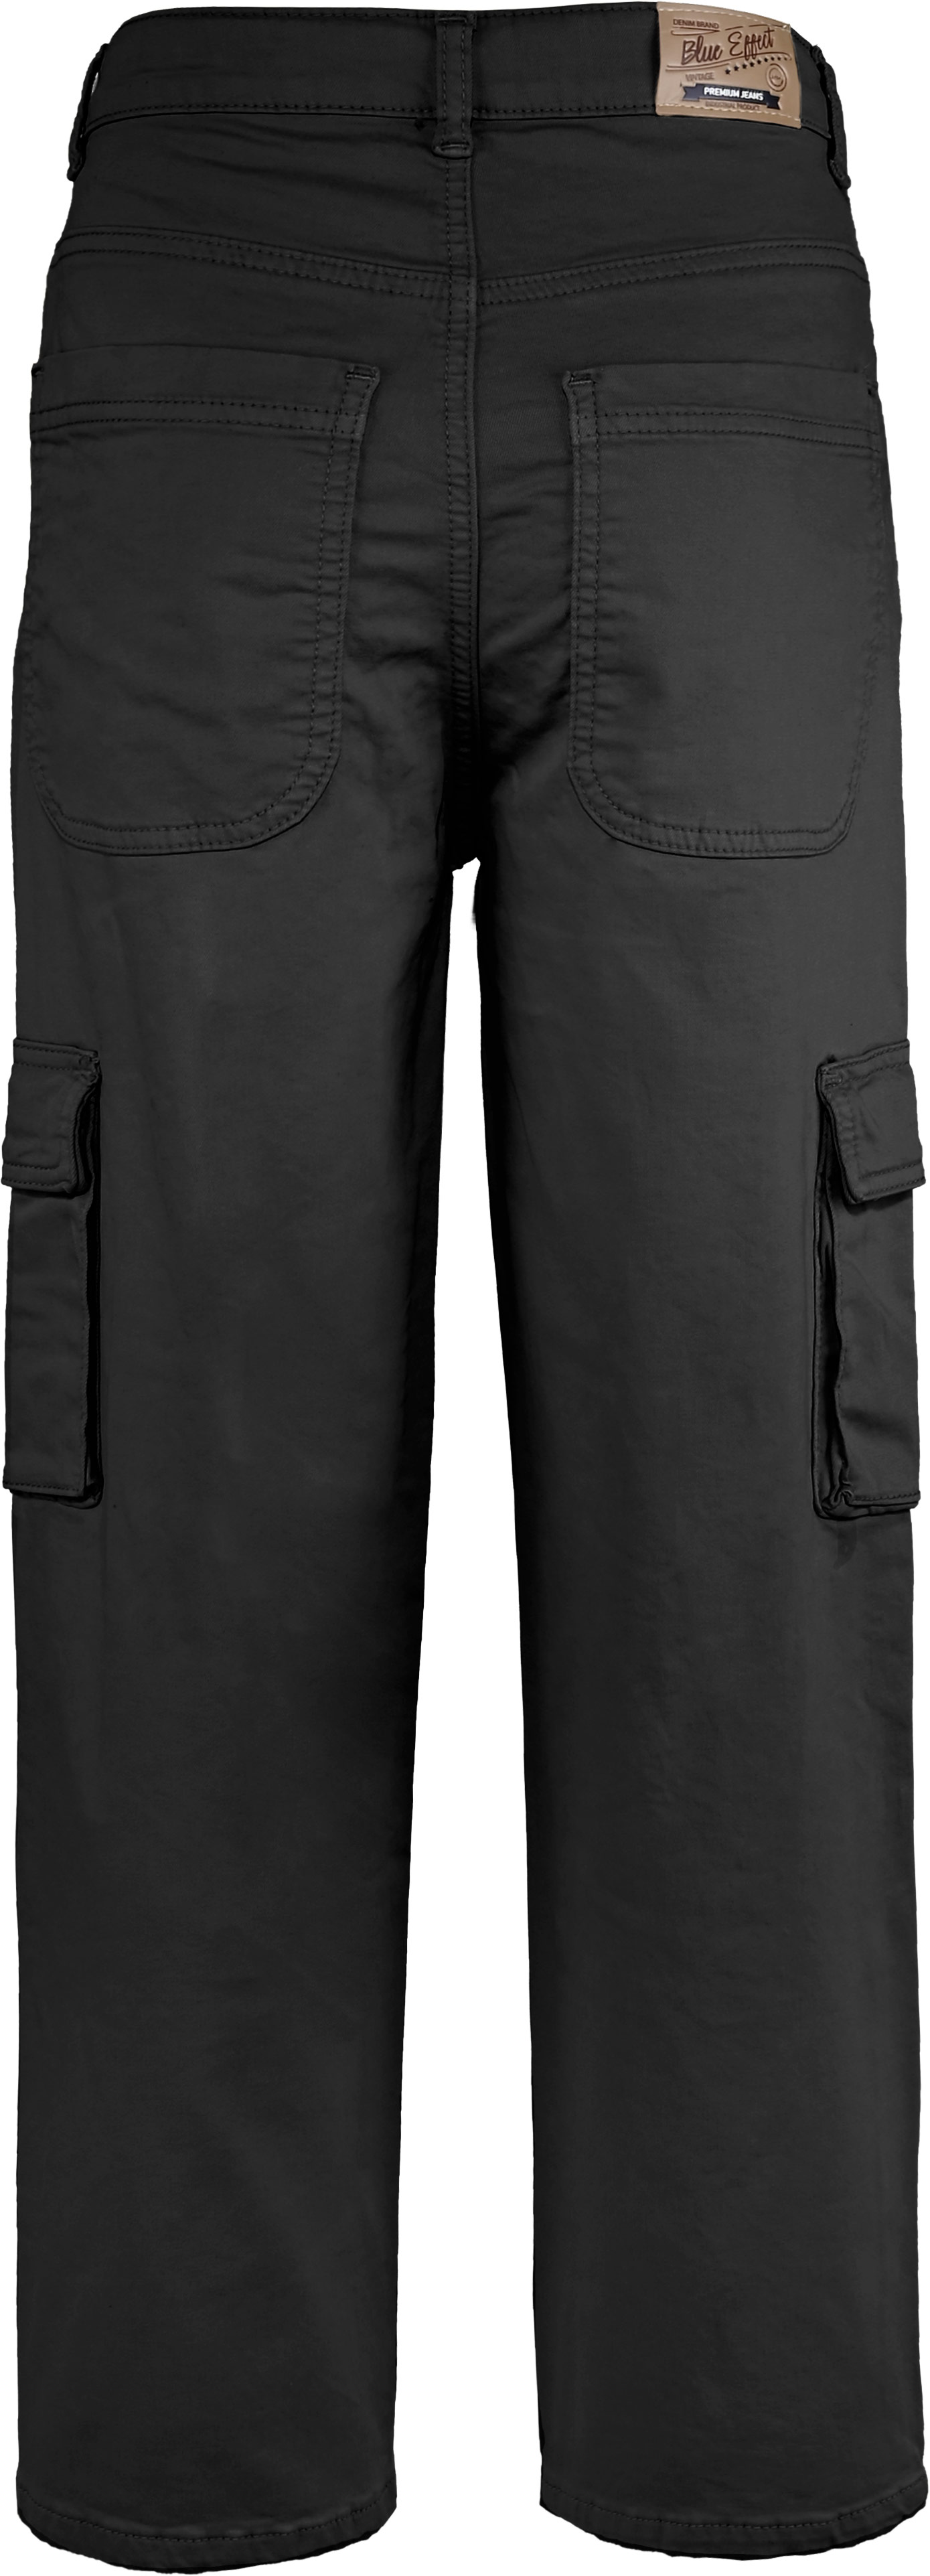 2861-Boys Cargo Super Baggy available in normal, slim